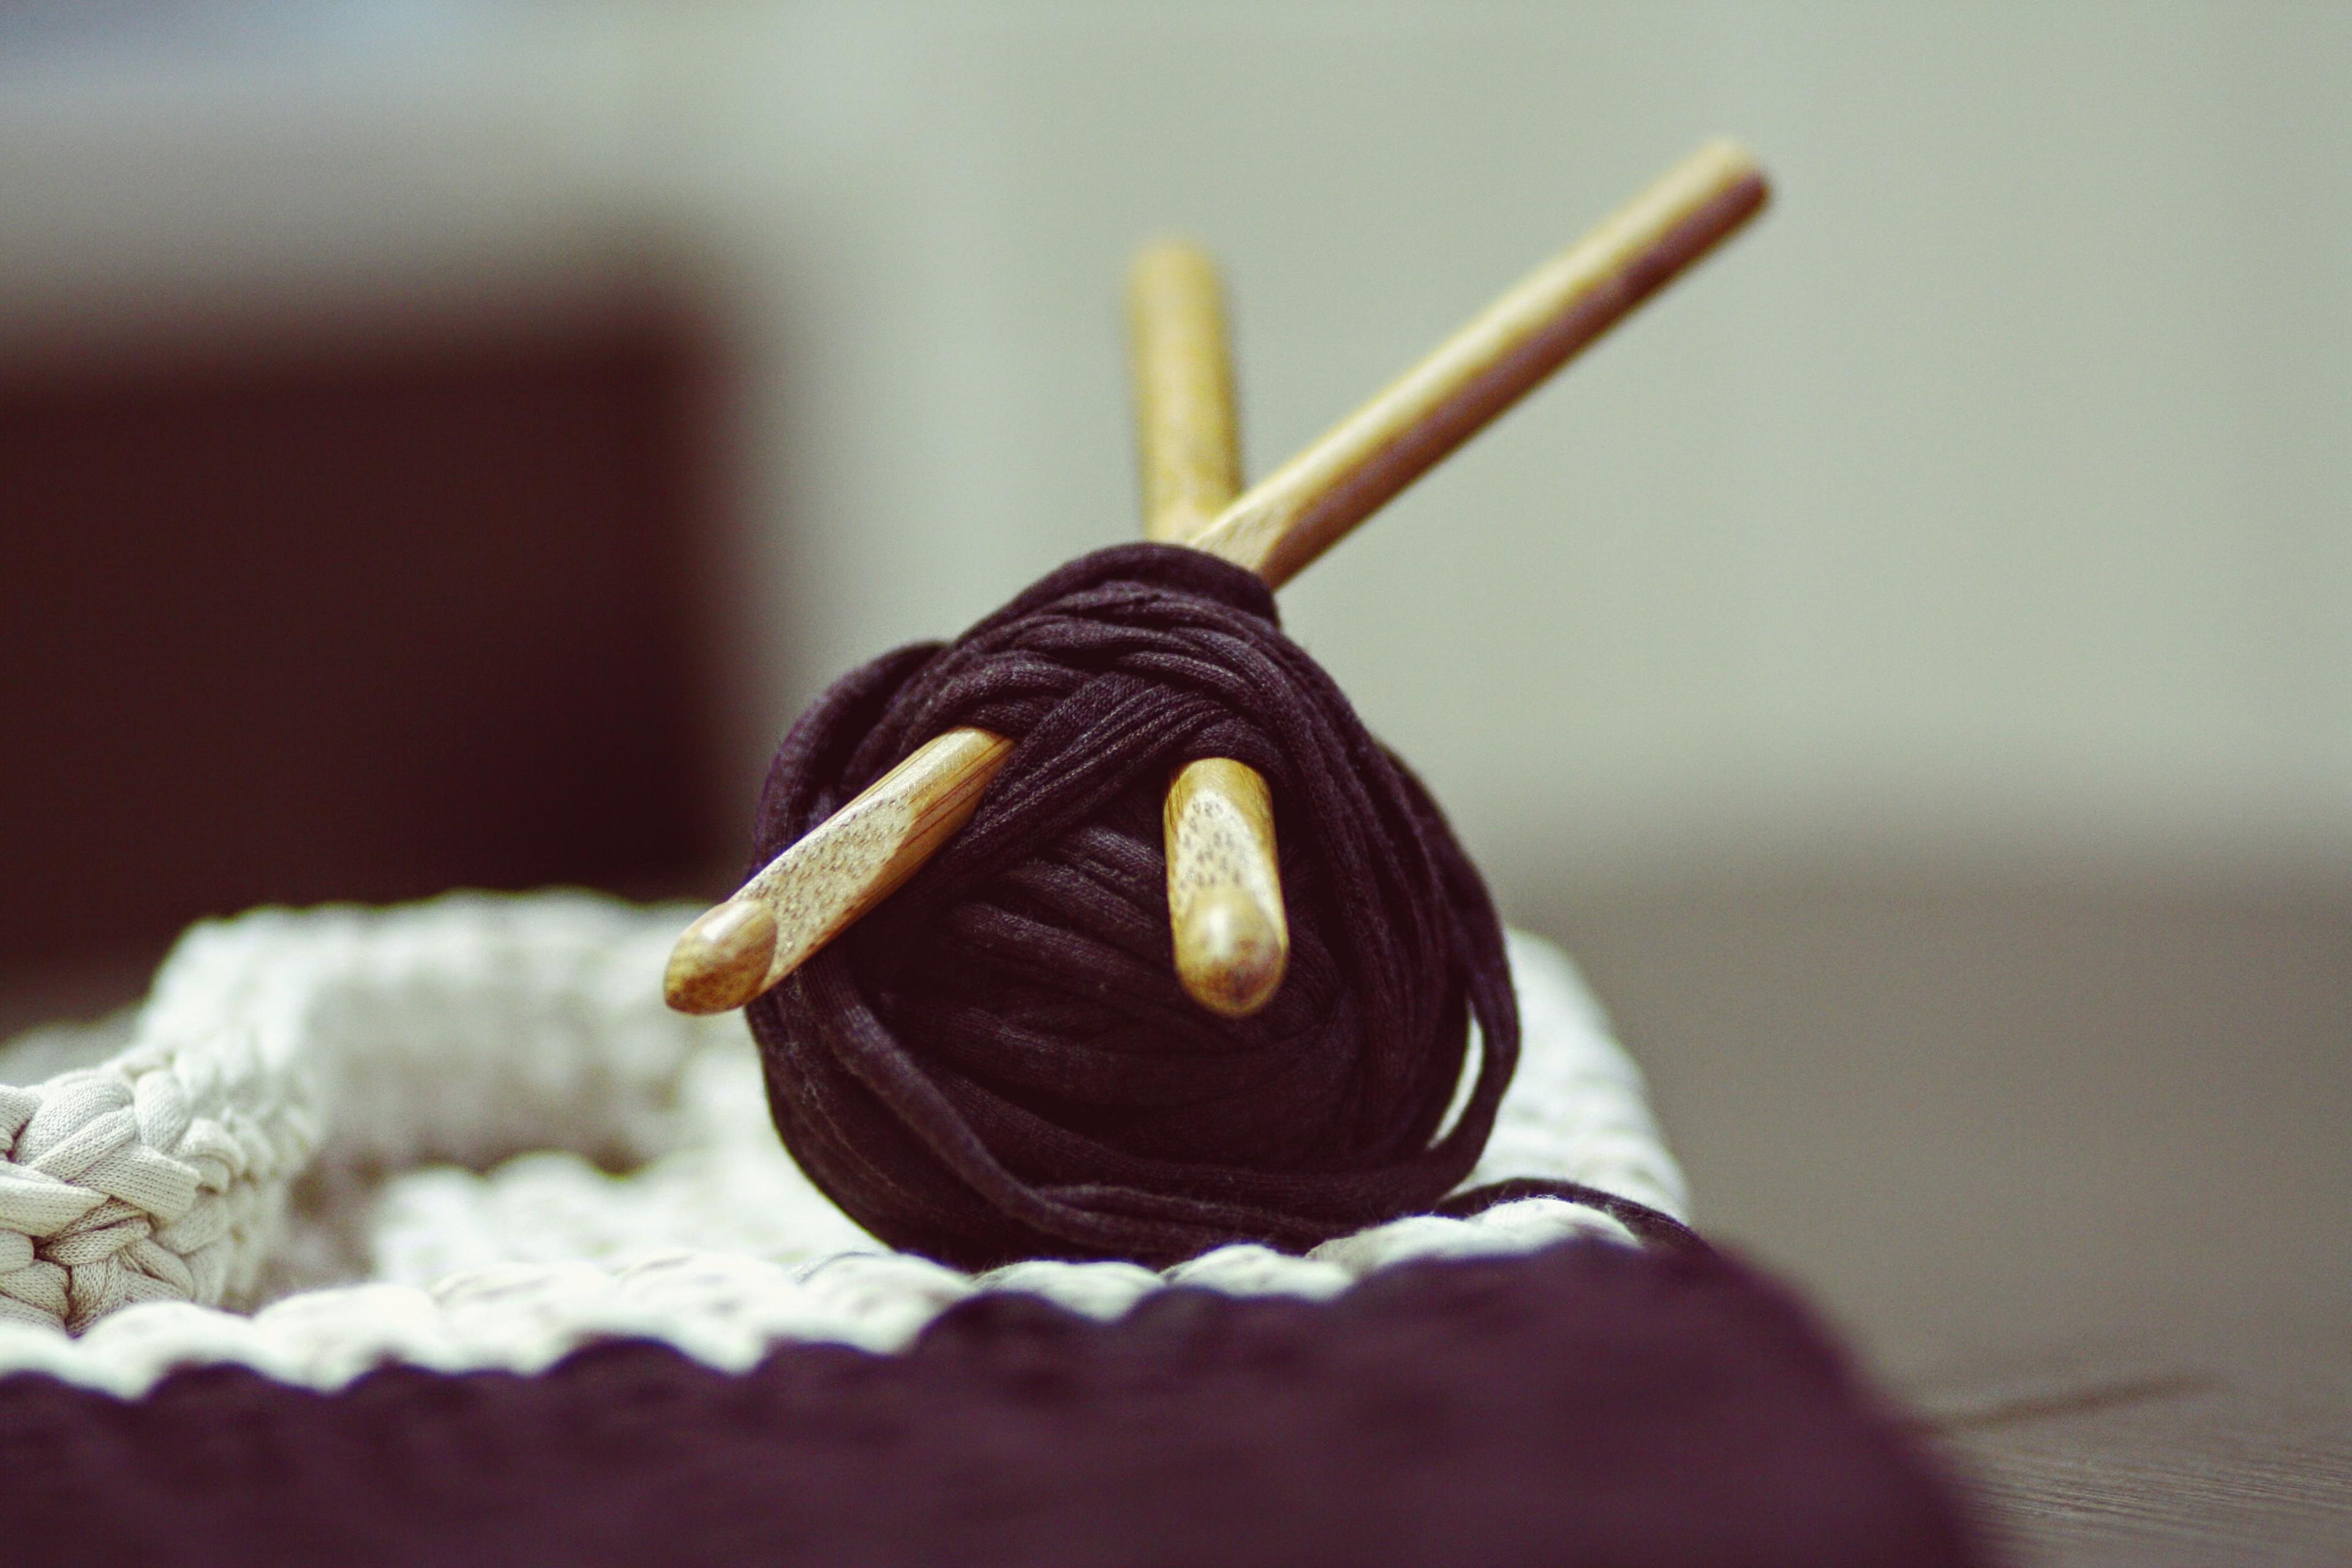 Two wooden knitting needles plunged into a ball of thick purple yarn